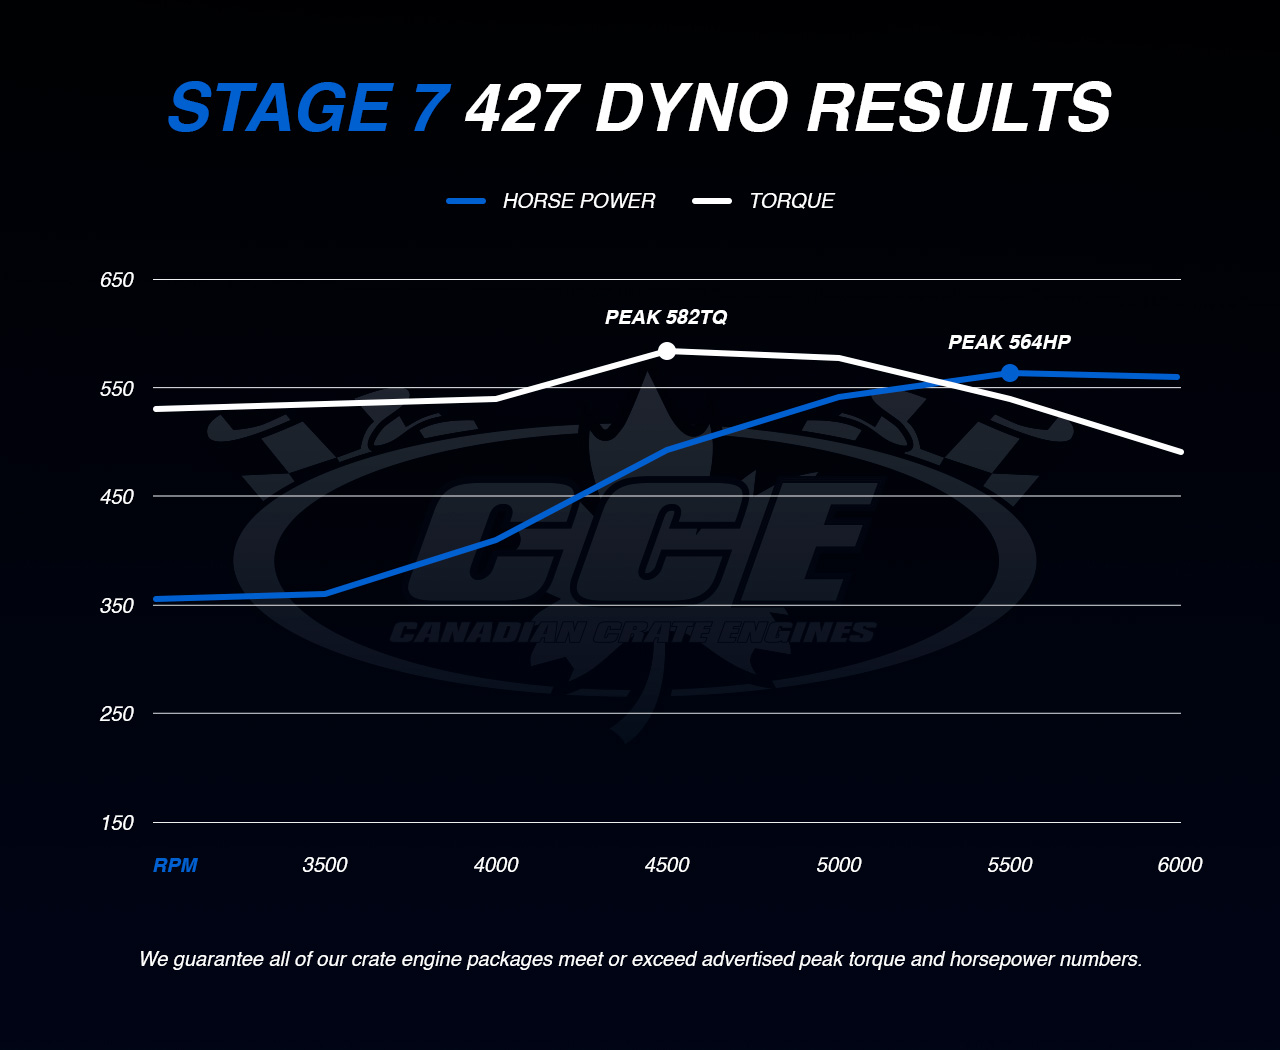 Dyno Graph Results for Ford Stage 7 showing peak torque of 582TQ and peak horsepower of 564HP